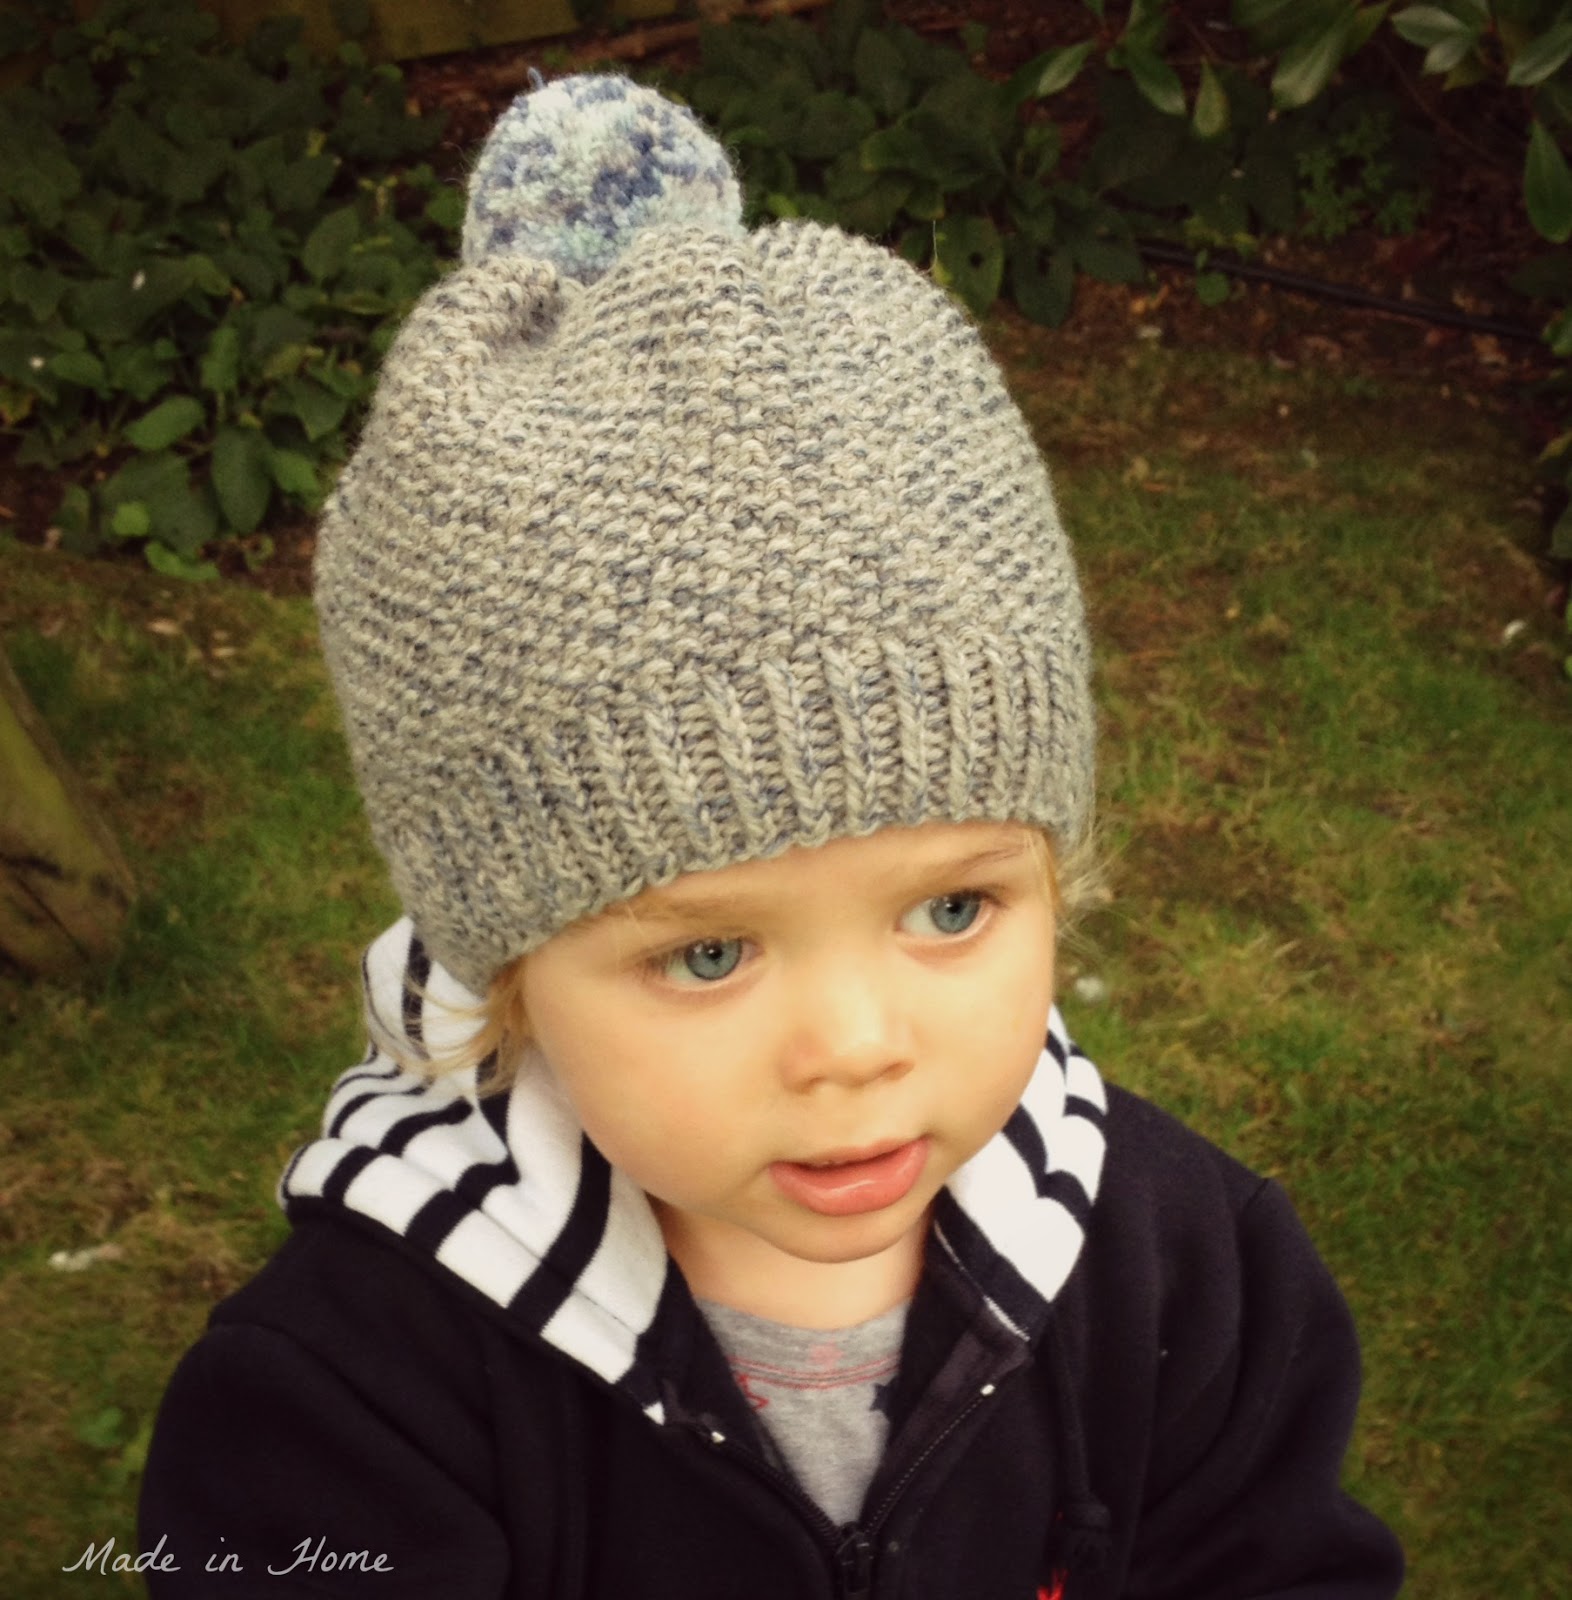 Made in Home Toddler Pompom Beanie Hat A free pattern {Knitting}